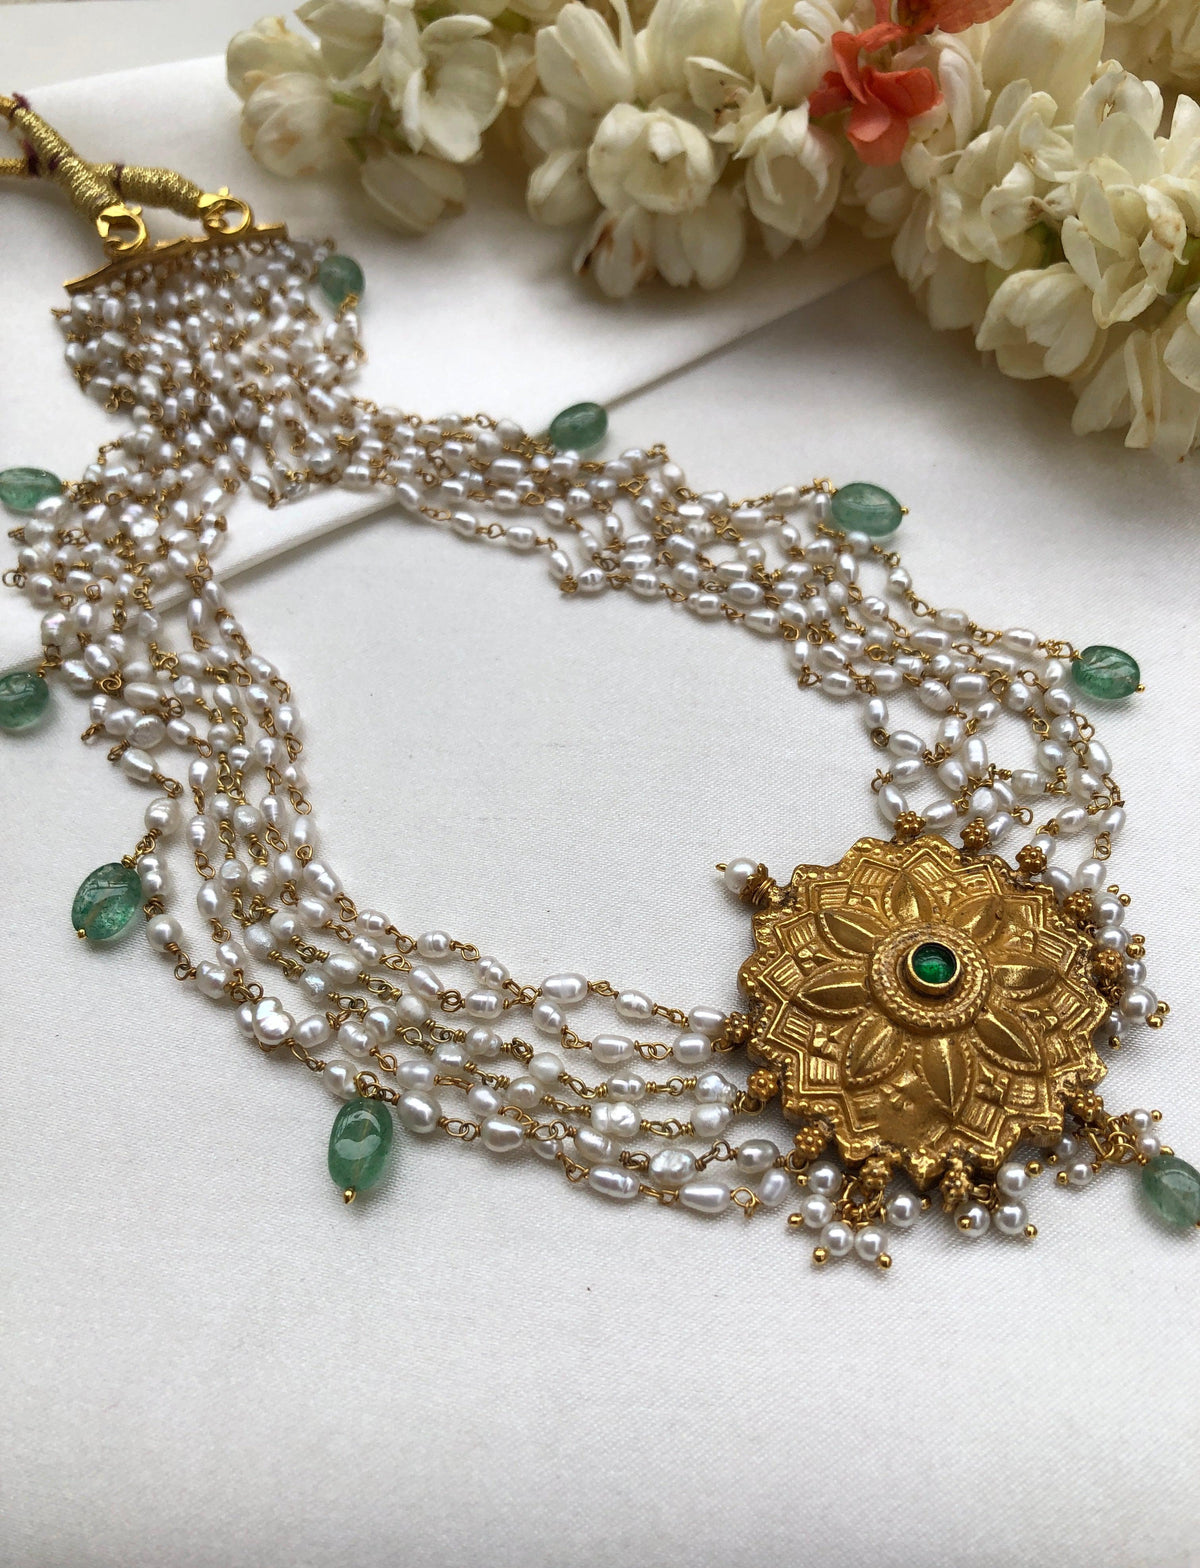 Antique gold polish pendant with green stone, 5 line pearls with green drops necklace (MADE TO ORDER)-Silver Neckpiece-PL-House of Taamara